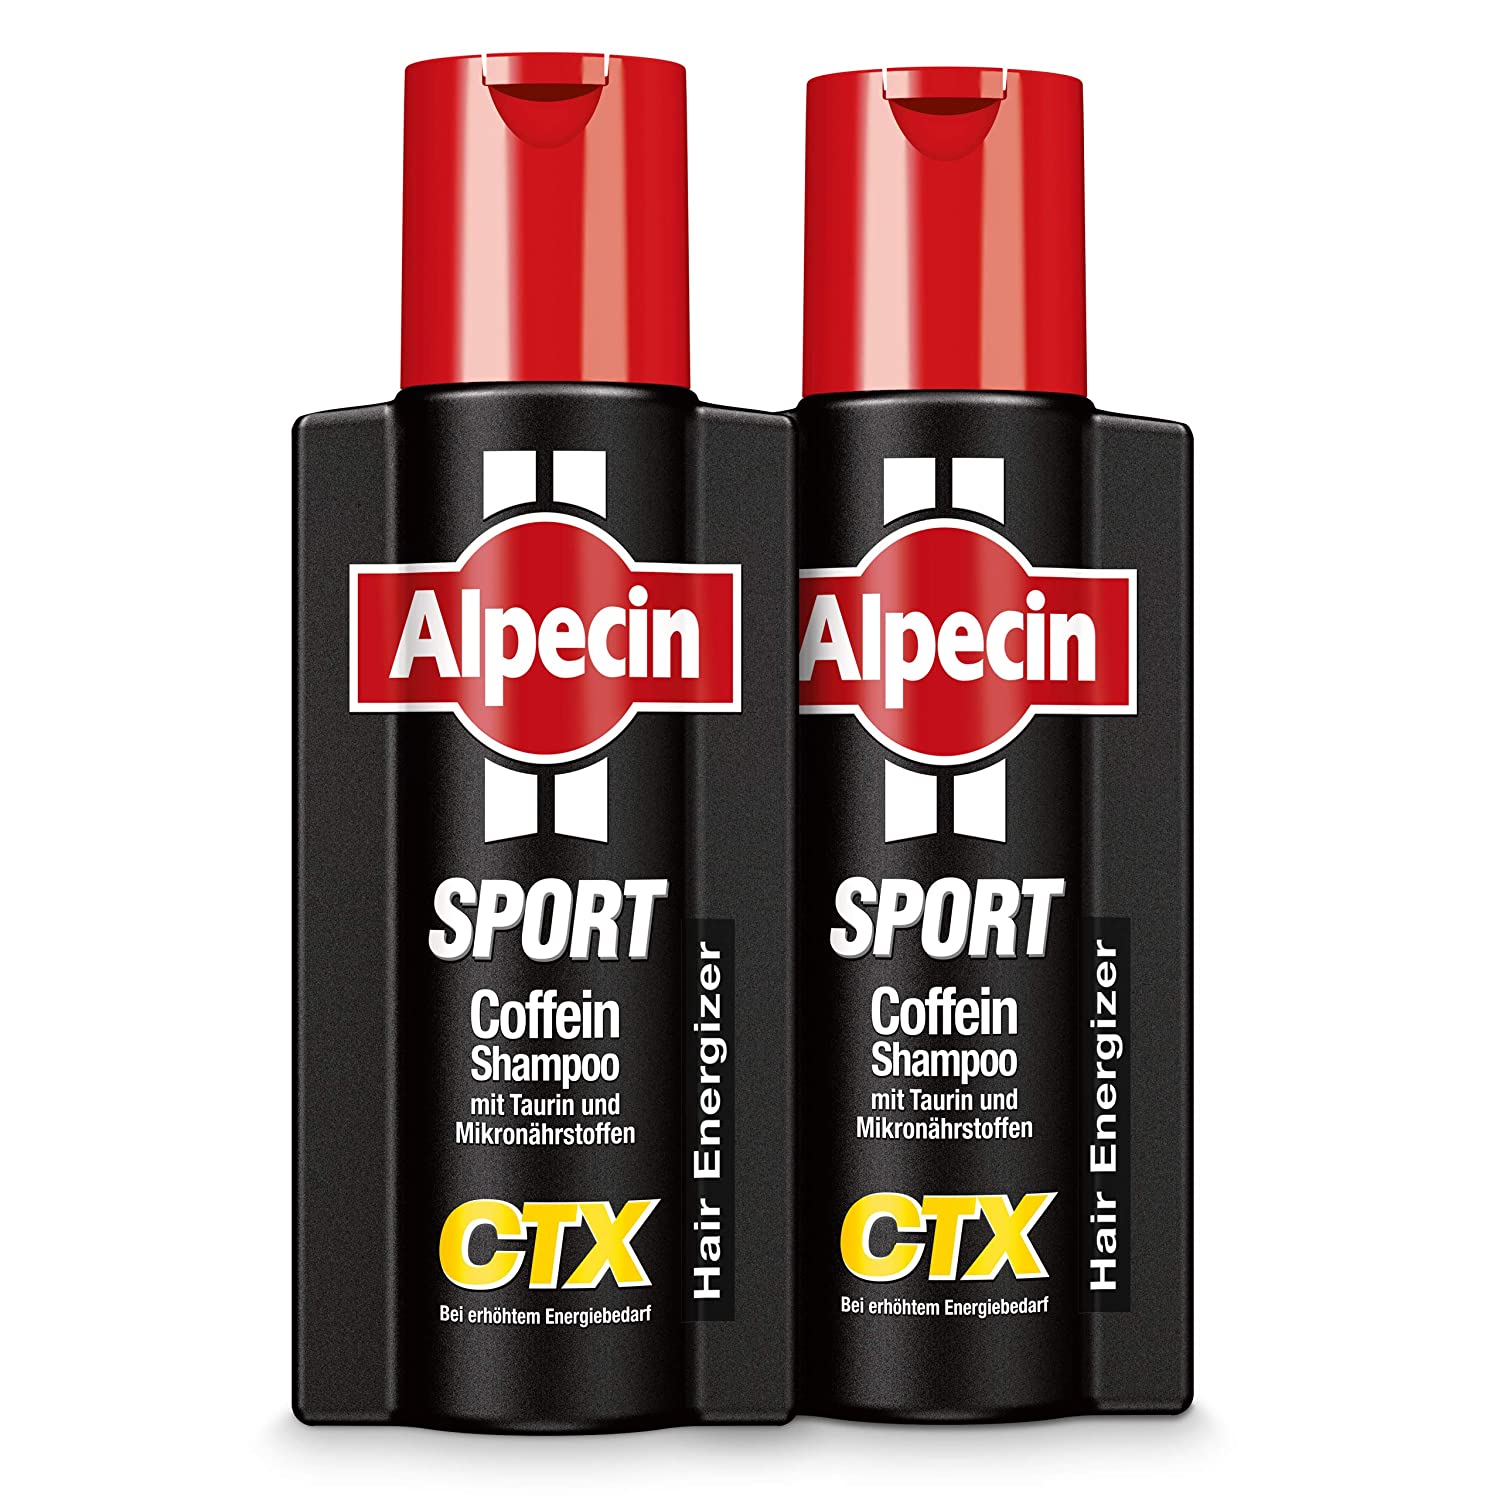 Alpecin Sport Caffeine Shampoo CTX – 2 x 250 ml – for Sporty Stress, Energy for Strong Hair, Hair Care for Men, Made in Germany